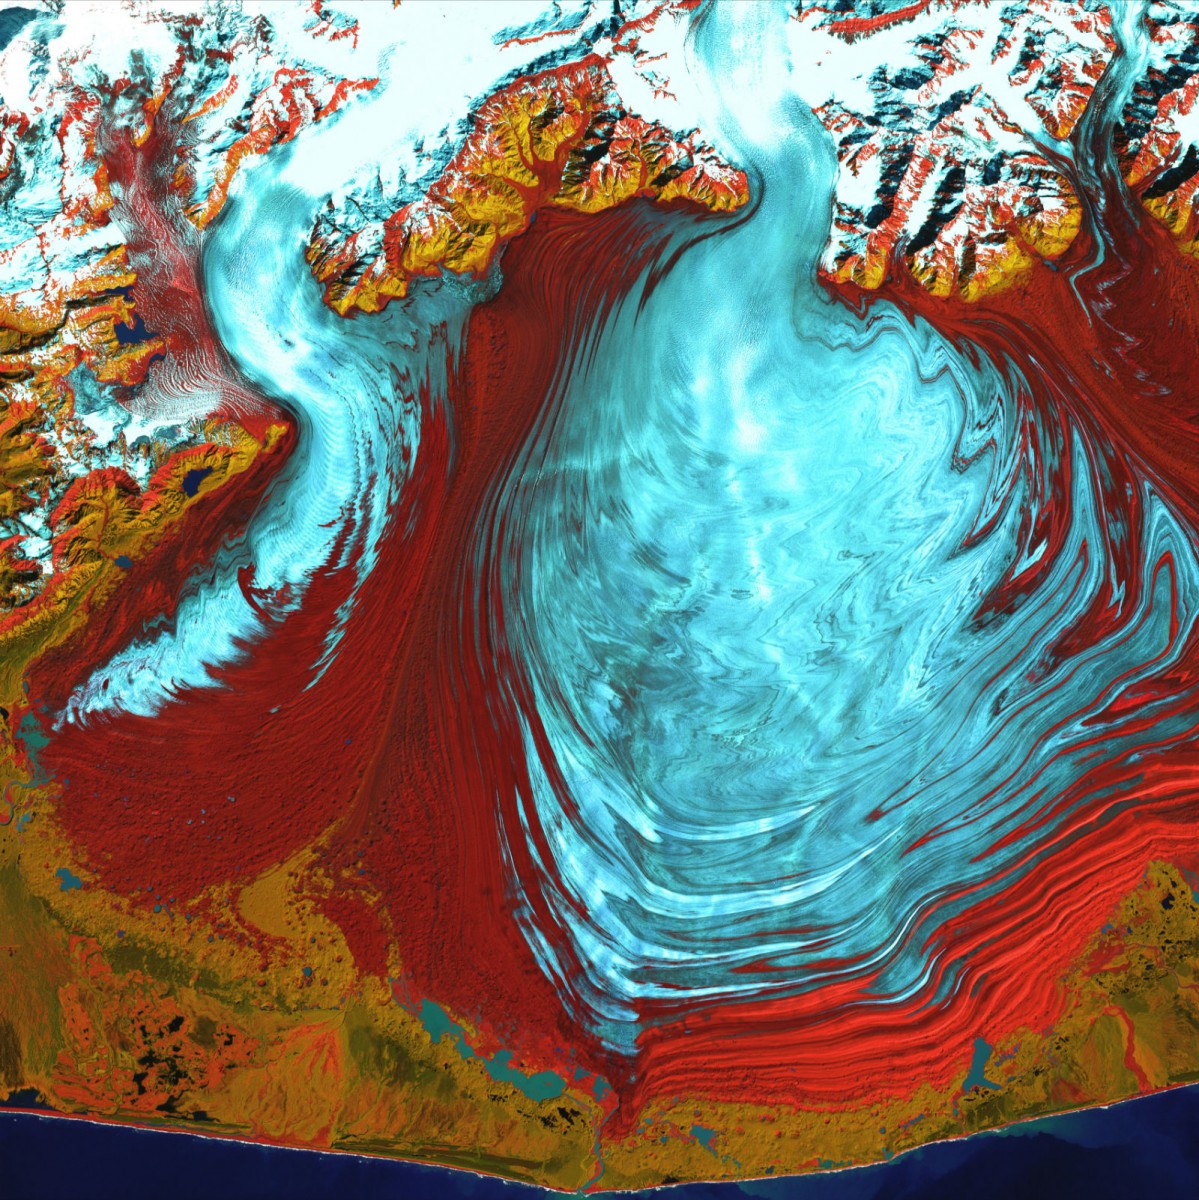 A colorful satellite photo showing a glacier as a light blue puddle spreading out across a red and orange rippled plain.